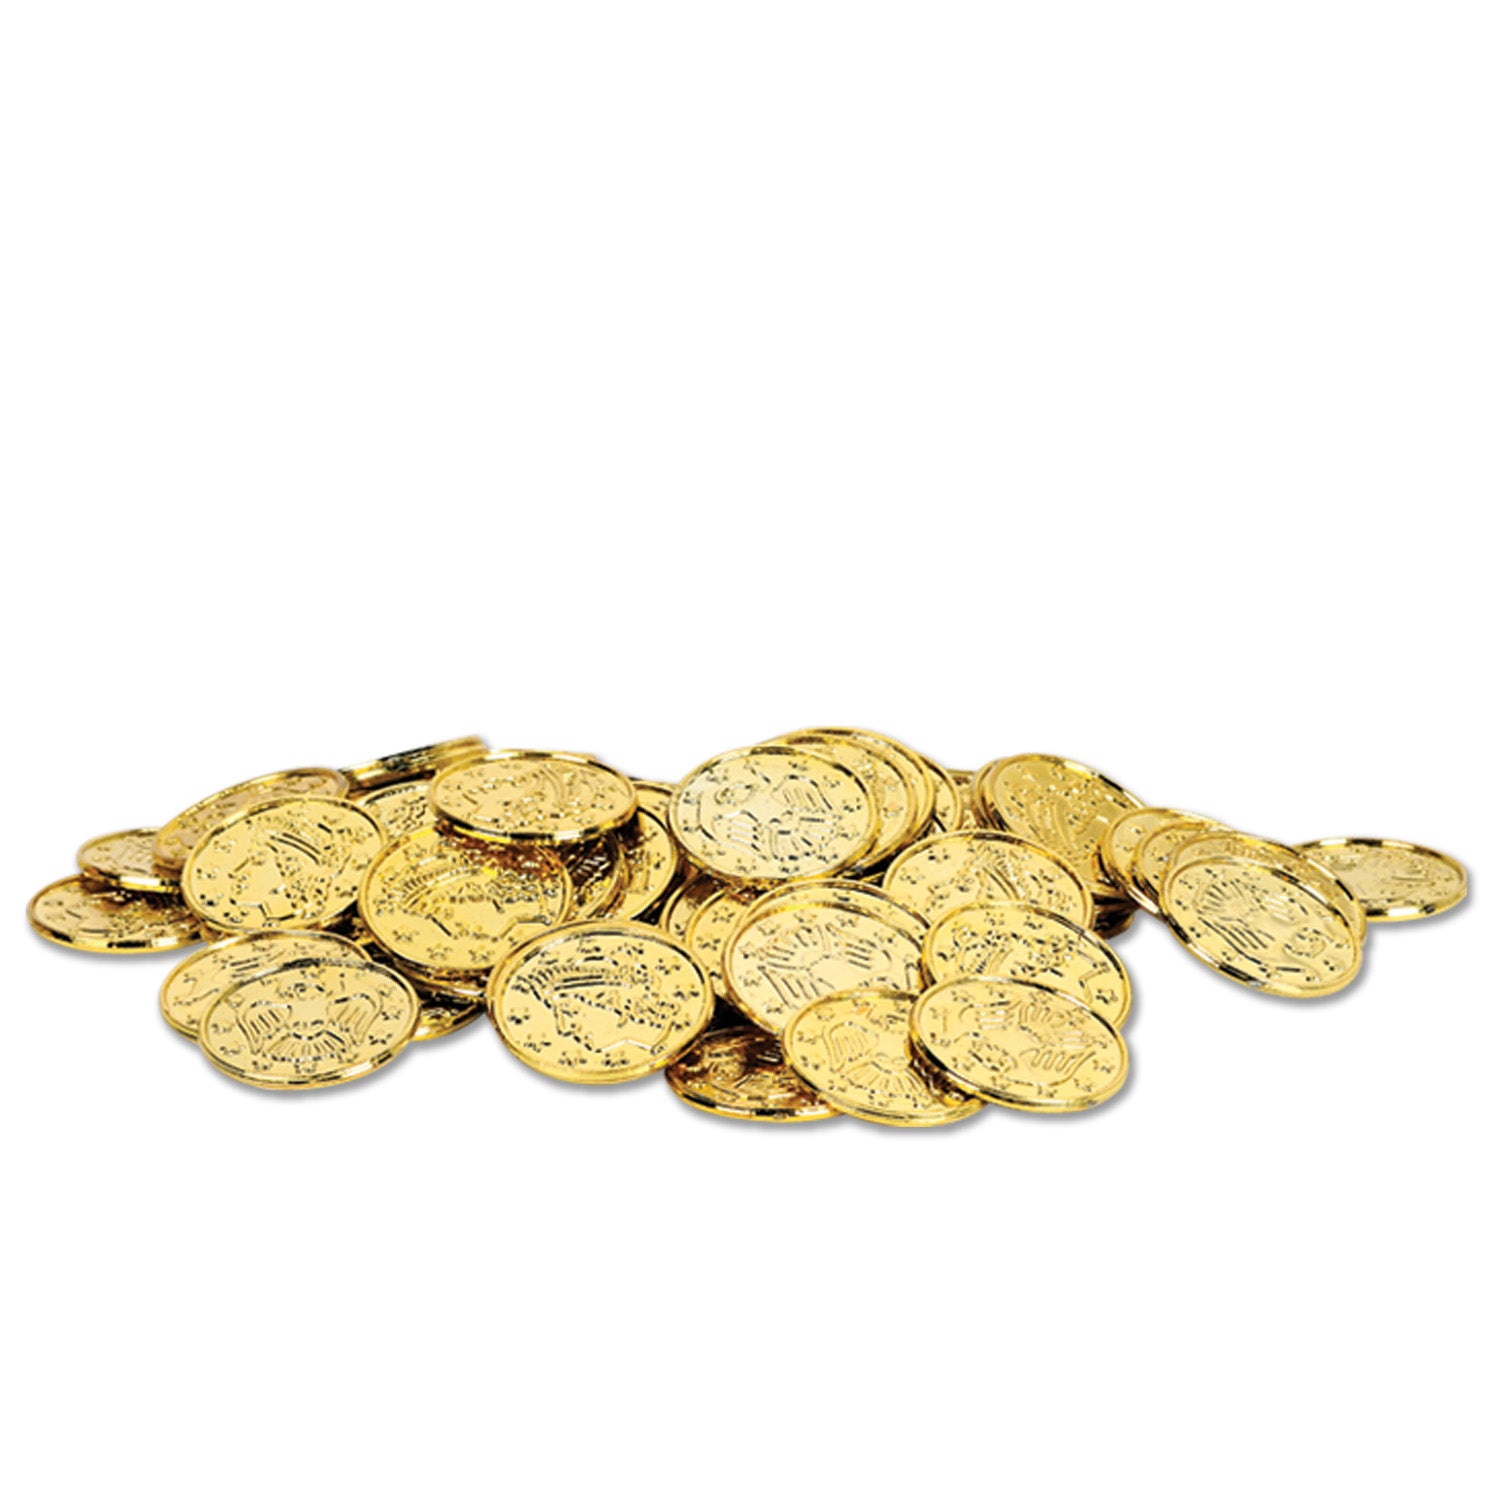 Plastic Gold Pirate Coins 100pc